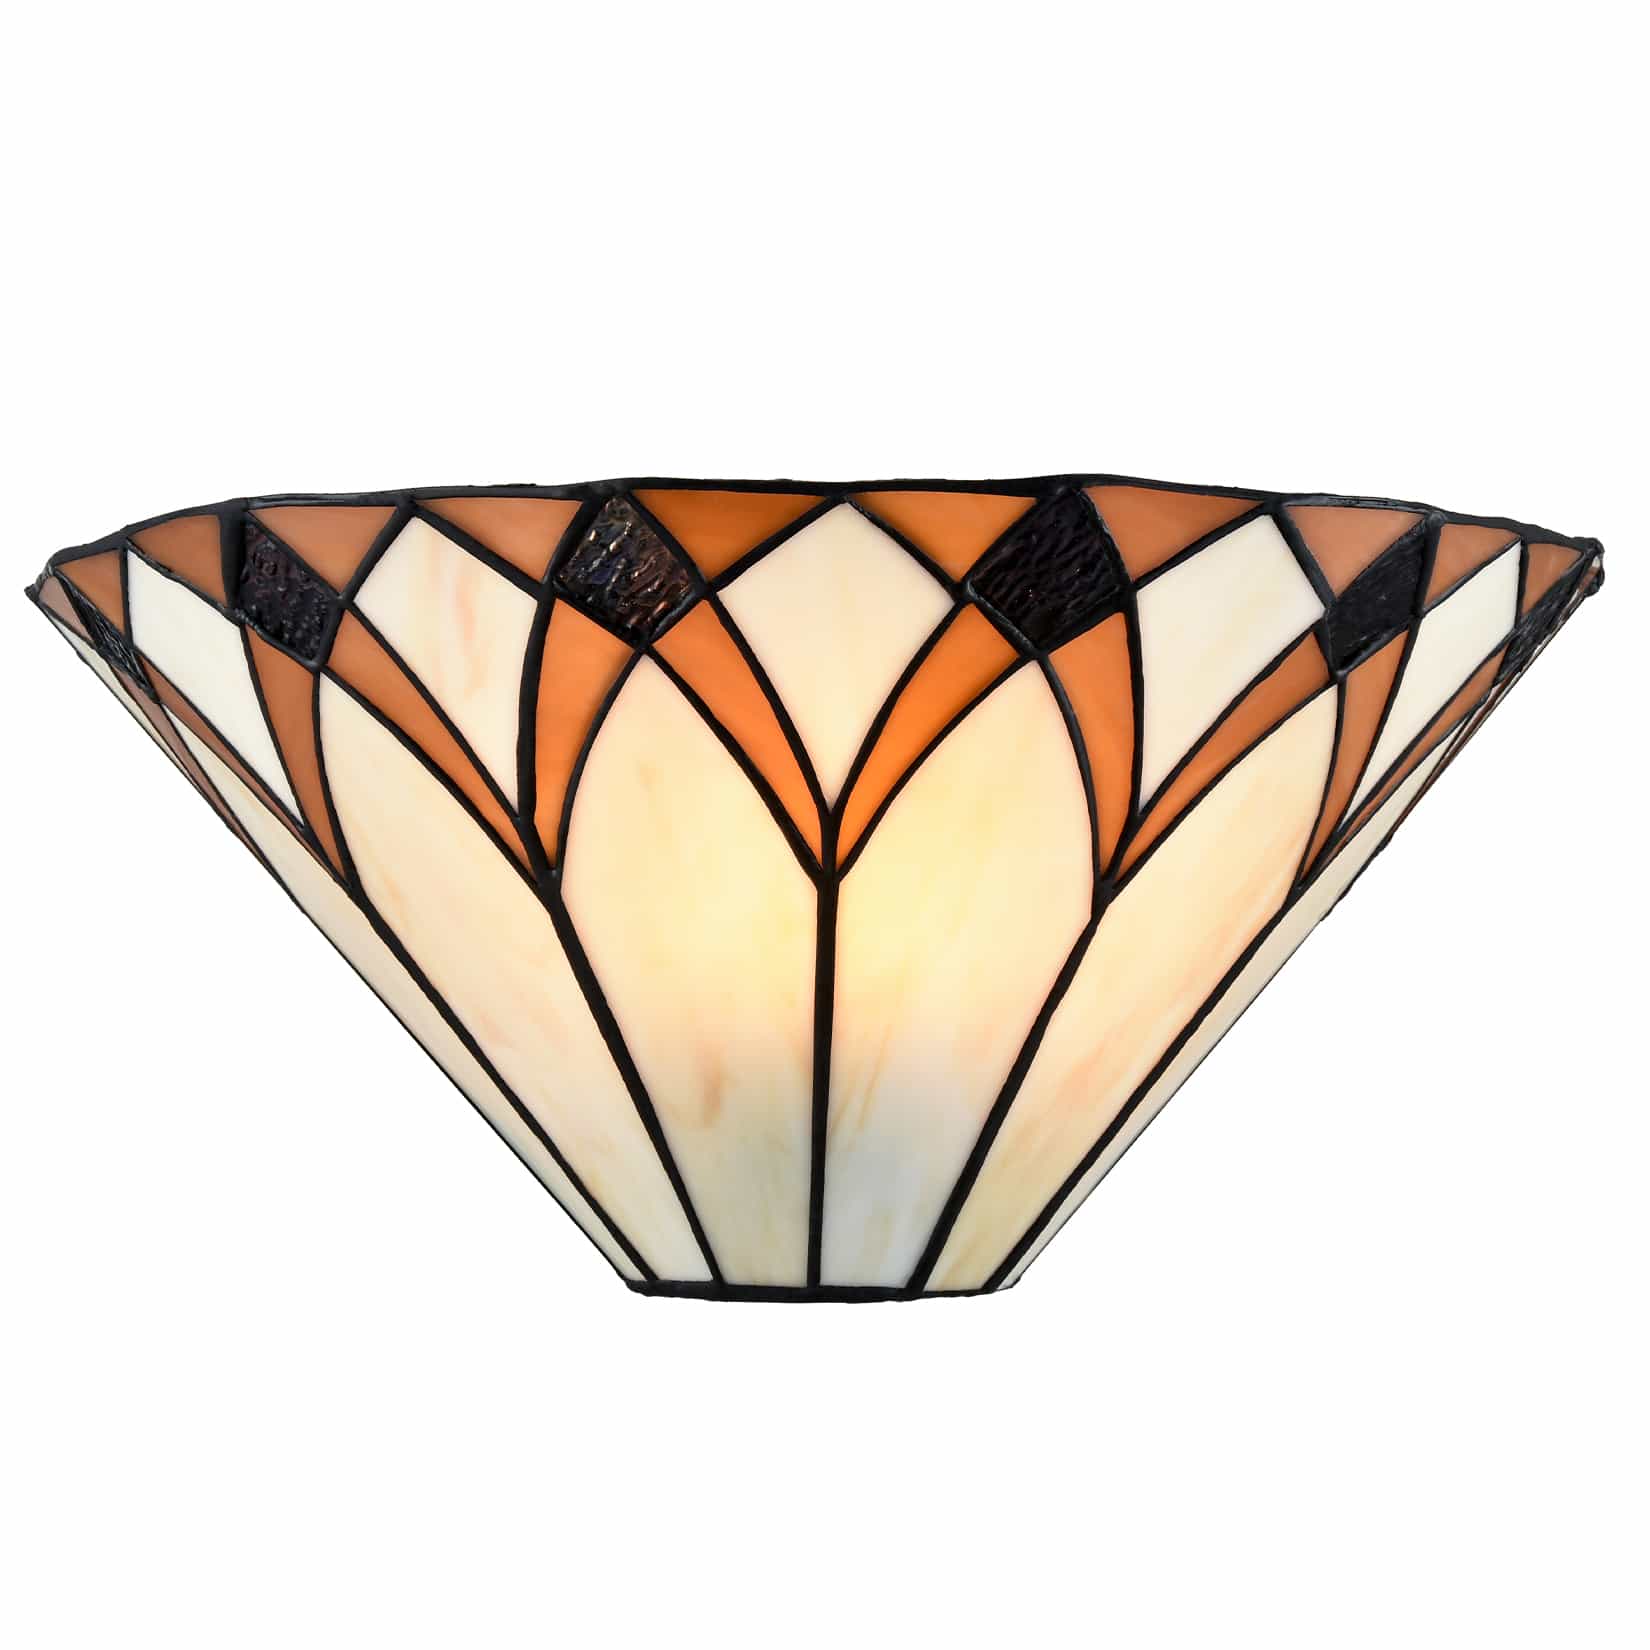 Tiffany Wall Sconce with Stained Glass Wall Light